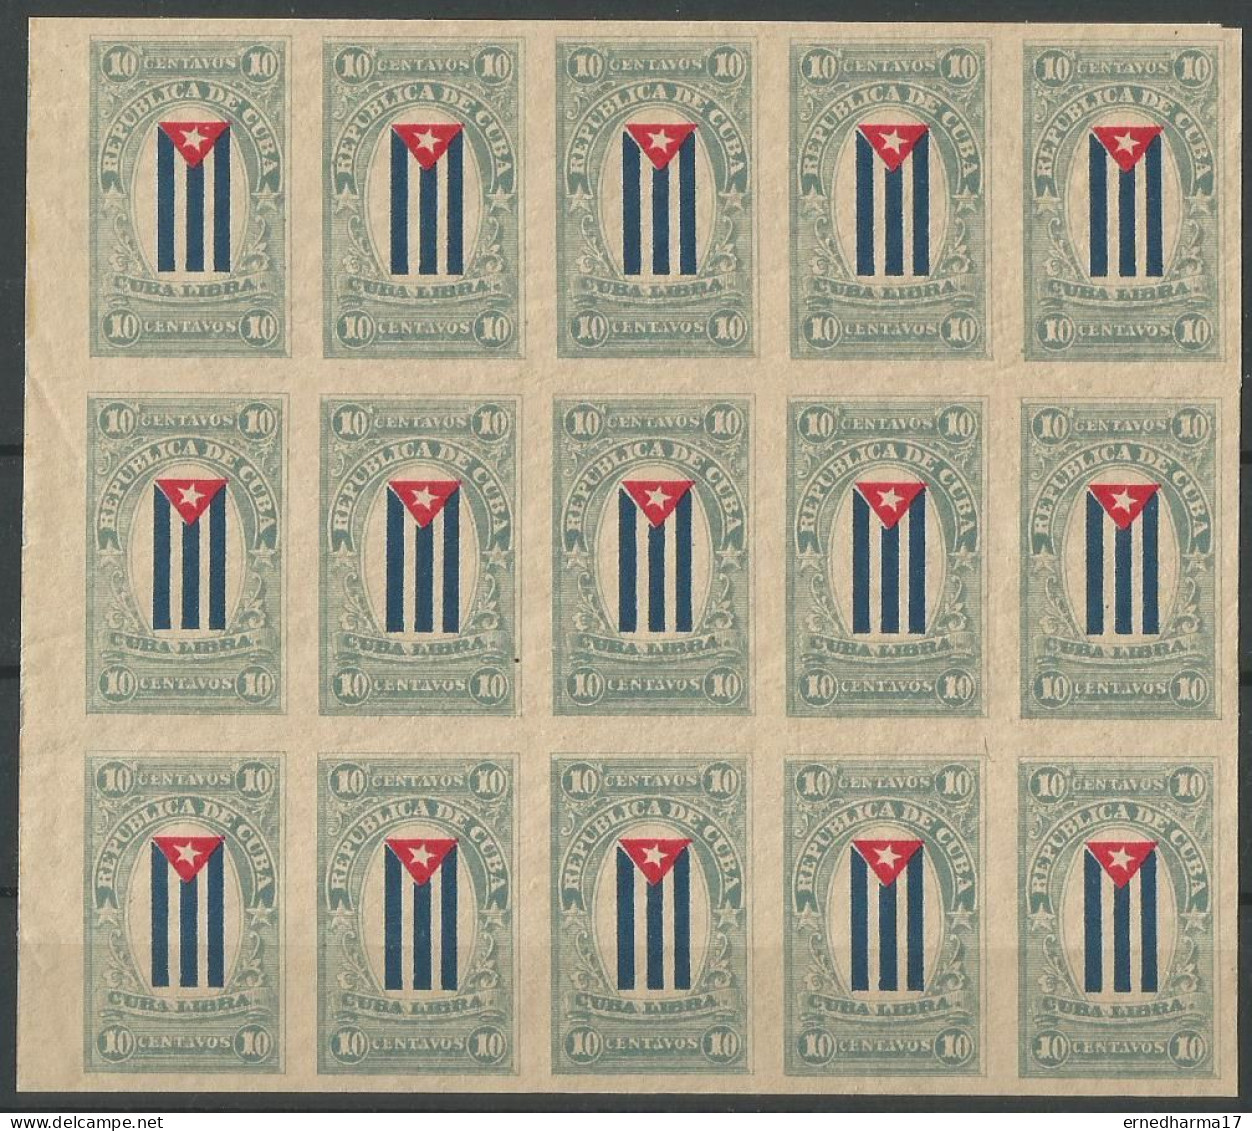 Cuba 1896. CUBA LIBRA. MNH BLOCK OF 15 IMPERFORATED STAMPS. CORREO MAMBÍ. REBEL STAMPS. ERROR. VERY SCARCE. - Imperforates, Proofs & Errors